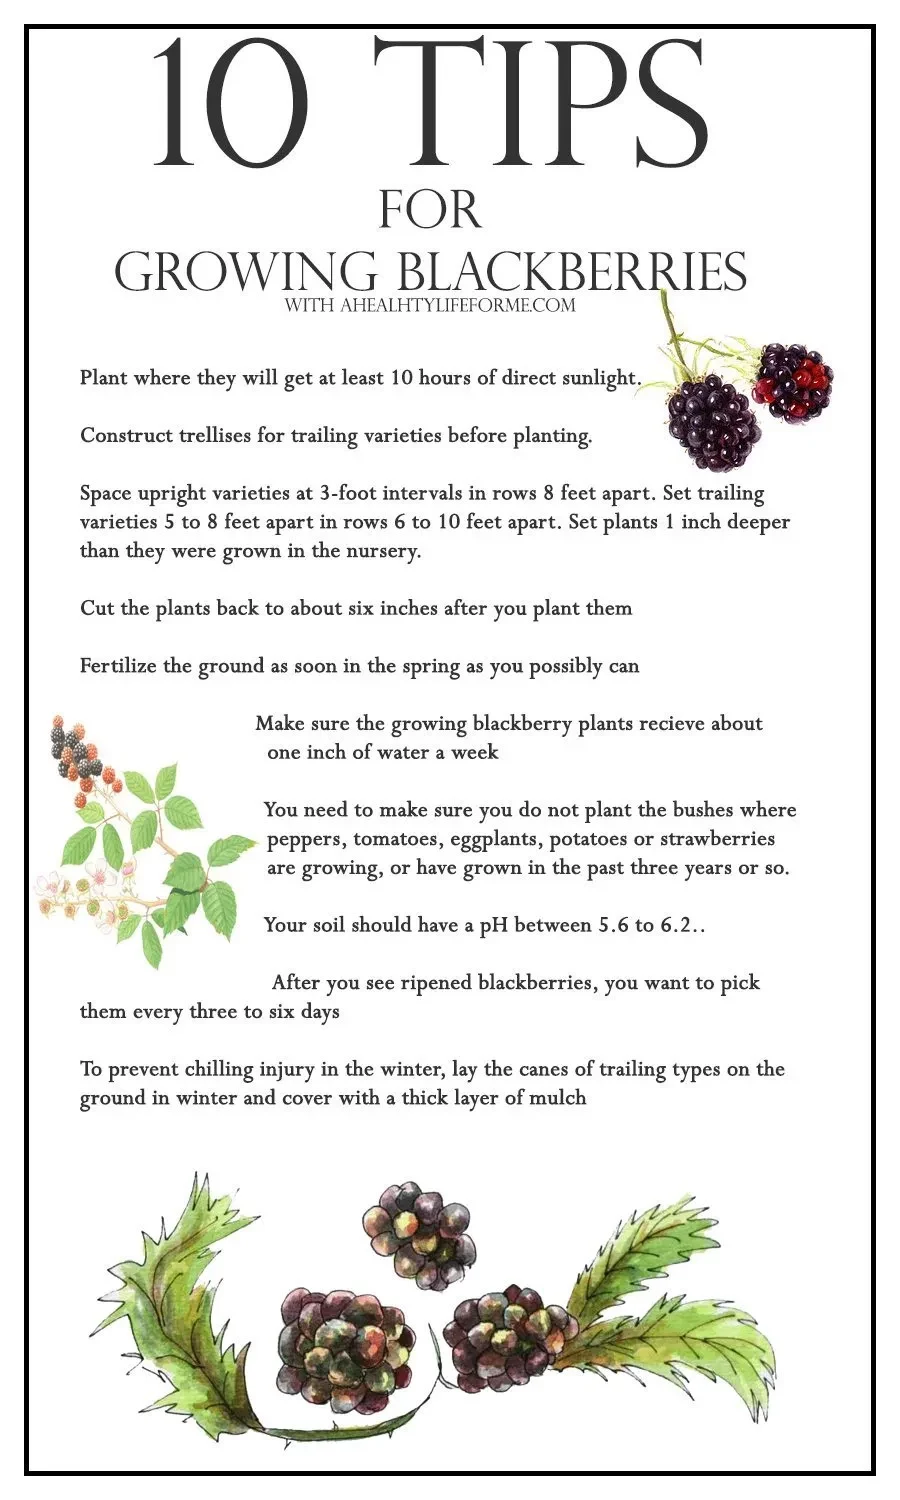 how to store blackberries after picking